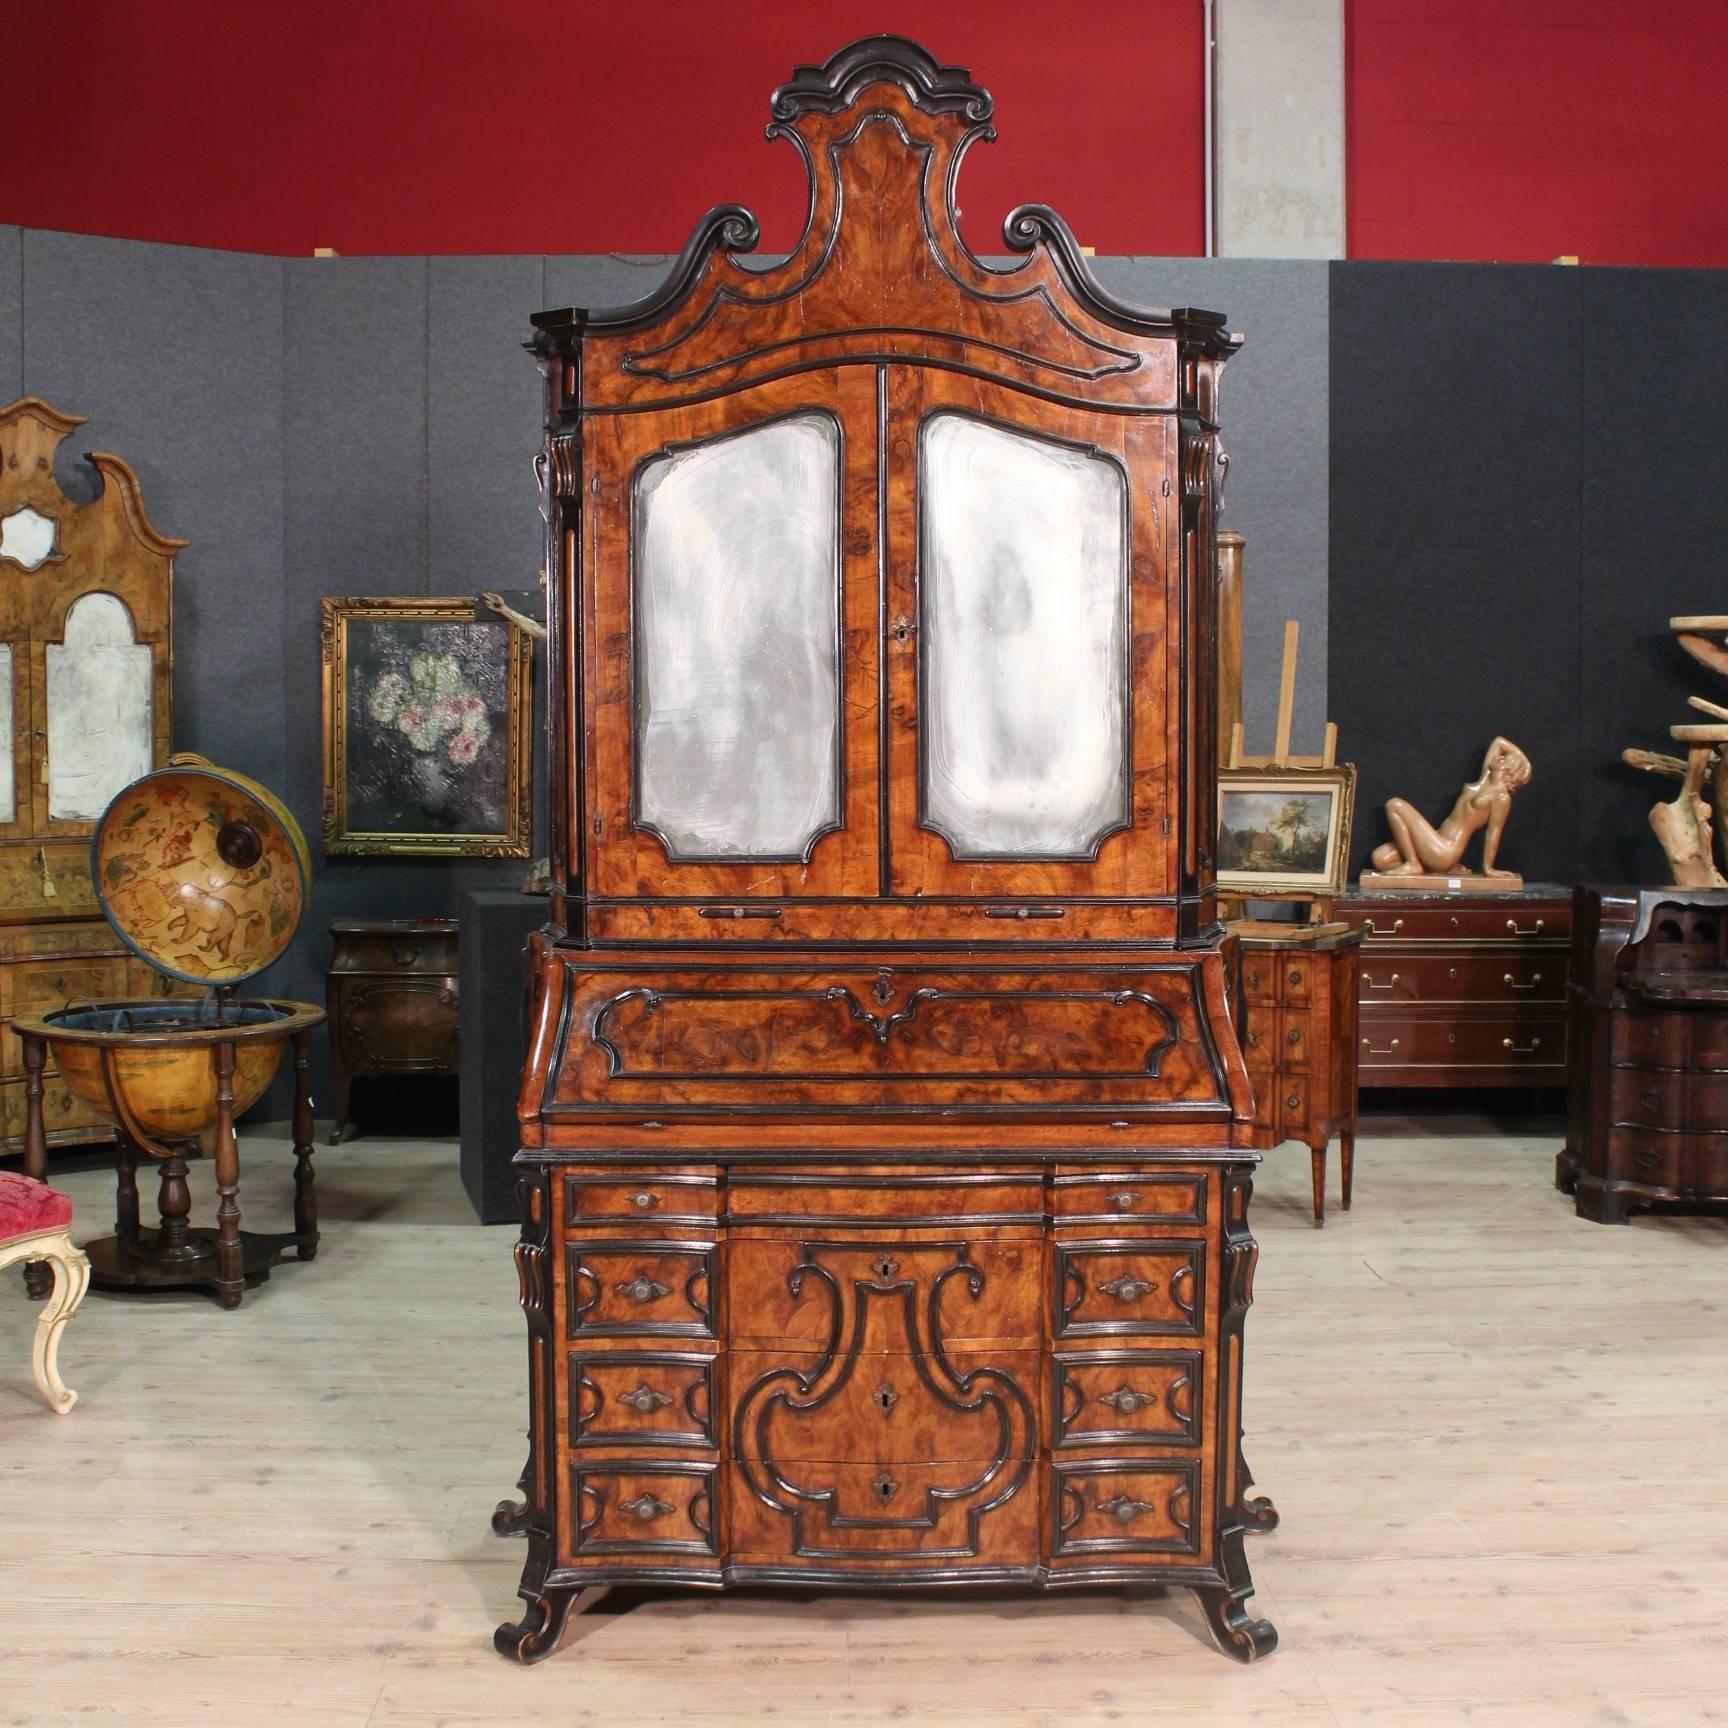 Bureau from Milan of the late 19th century. Double body furniture richly carved in walnut and burl walnut with ebonized decorations of great quality and impact. Bureau with moved front with countersink sides of fabulous line ideal for a living room